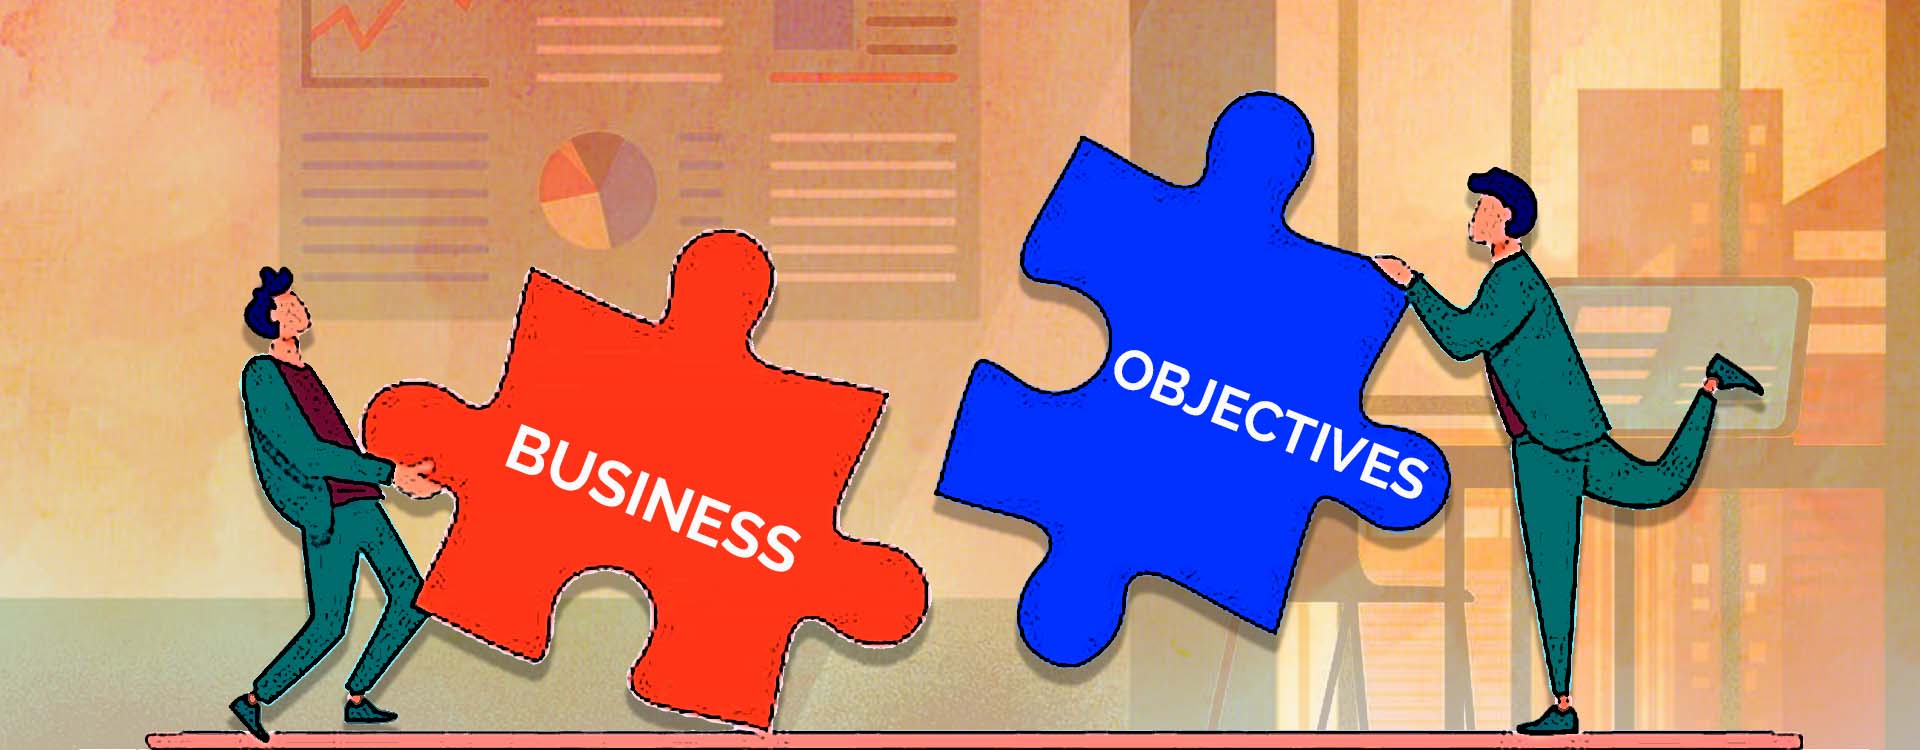 Know what are business objectives, its types and how to set them